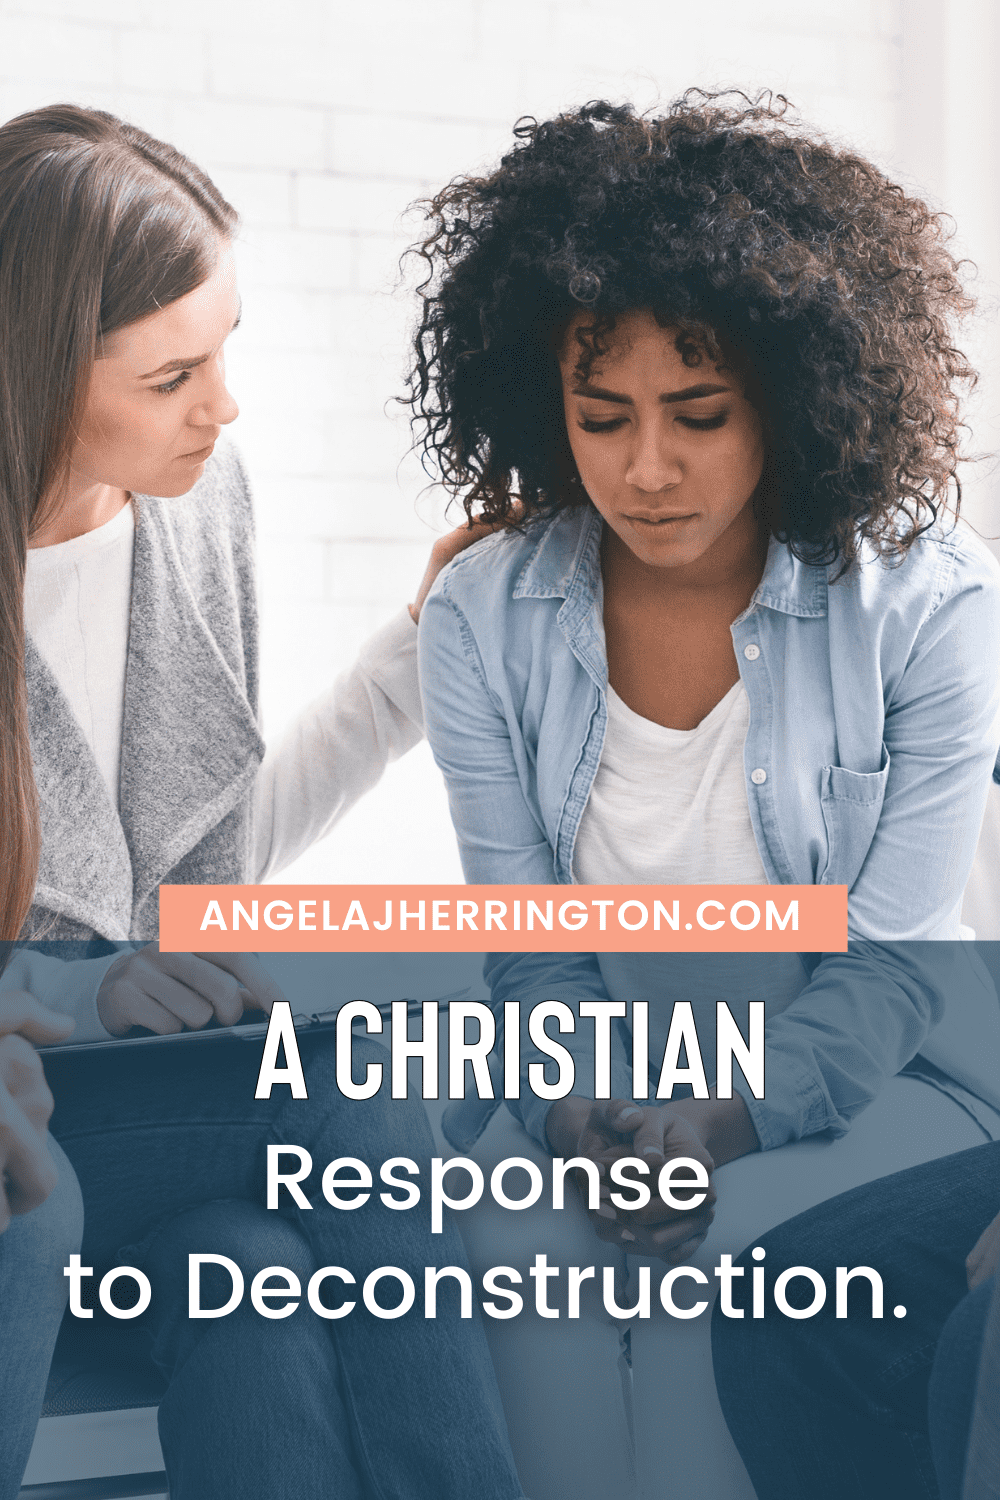 How christians should respond to those deconstructing their faith? written on top of a background of two women talking.